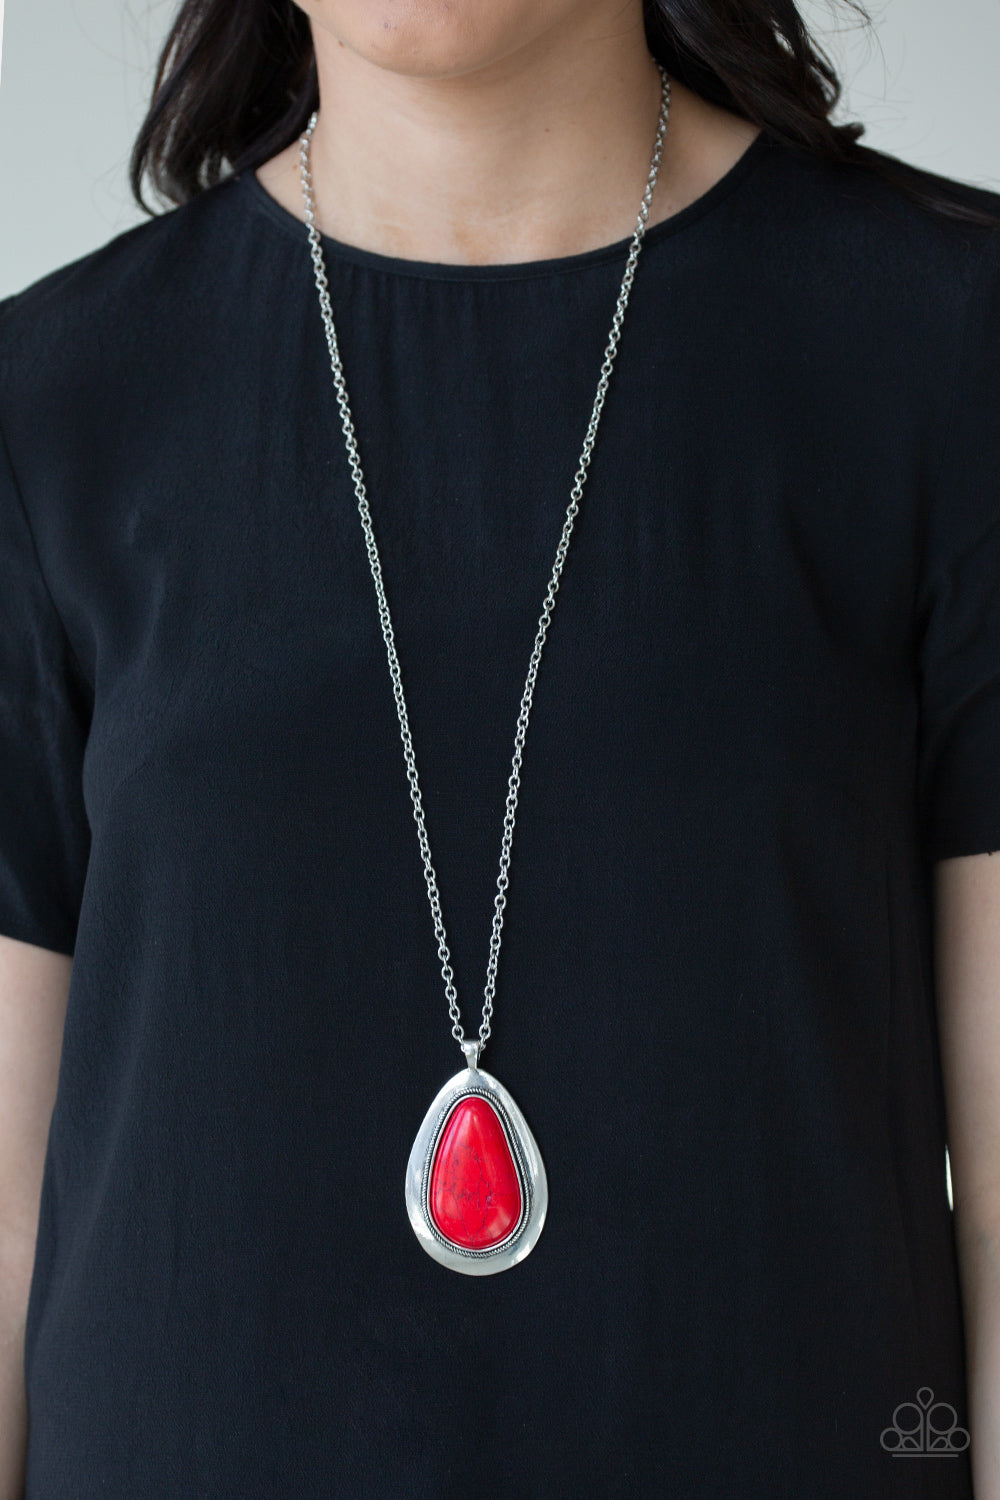 BADLAND To The Bone Red Necklace